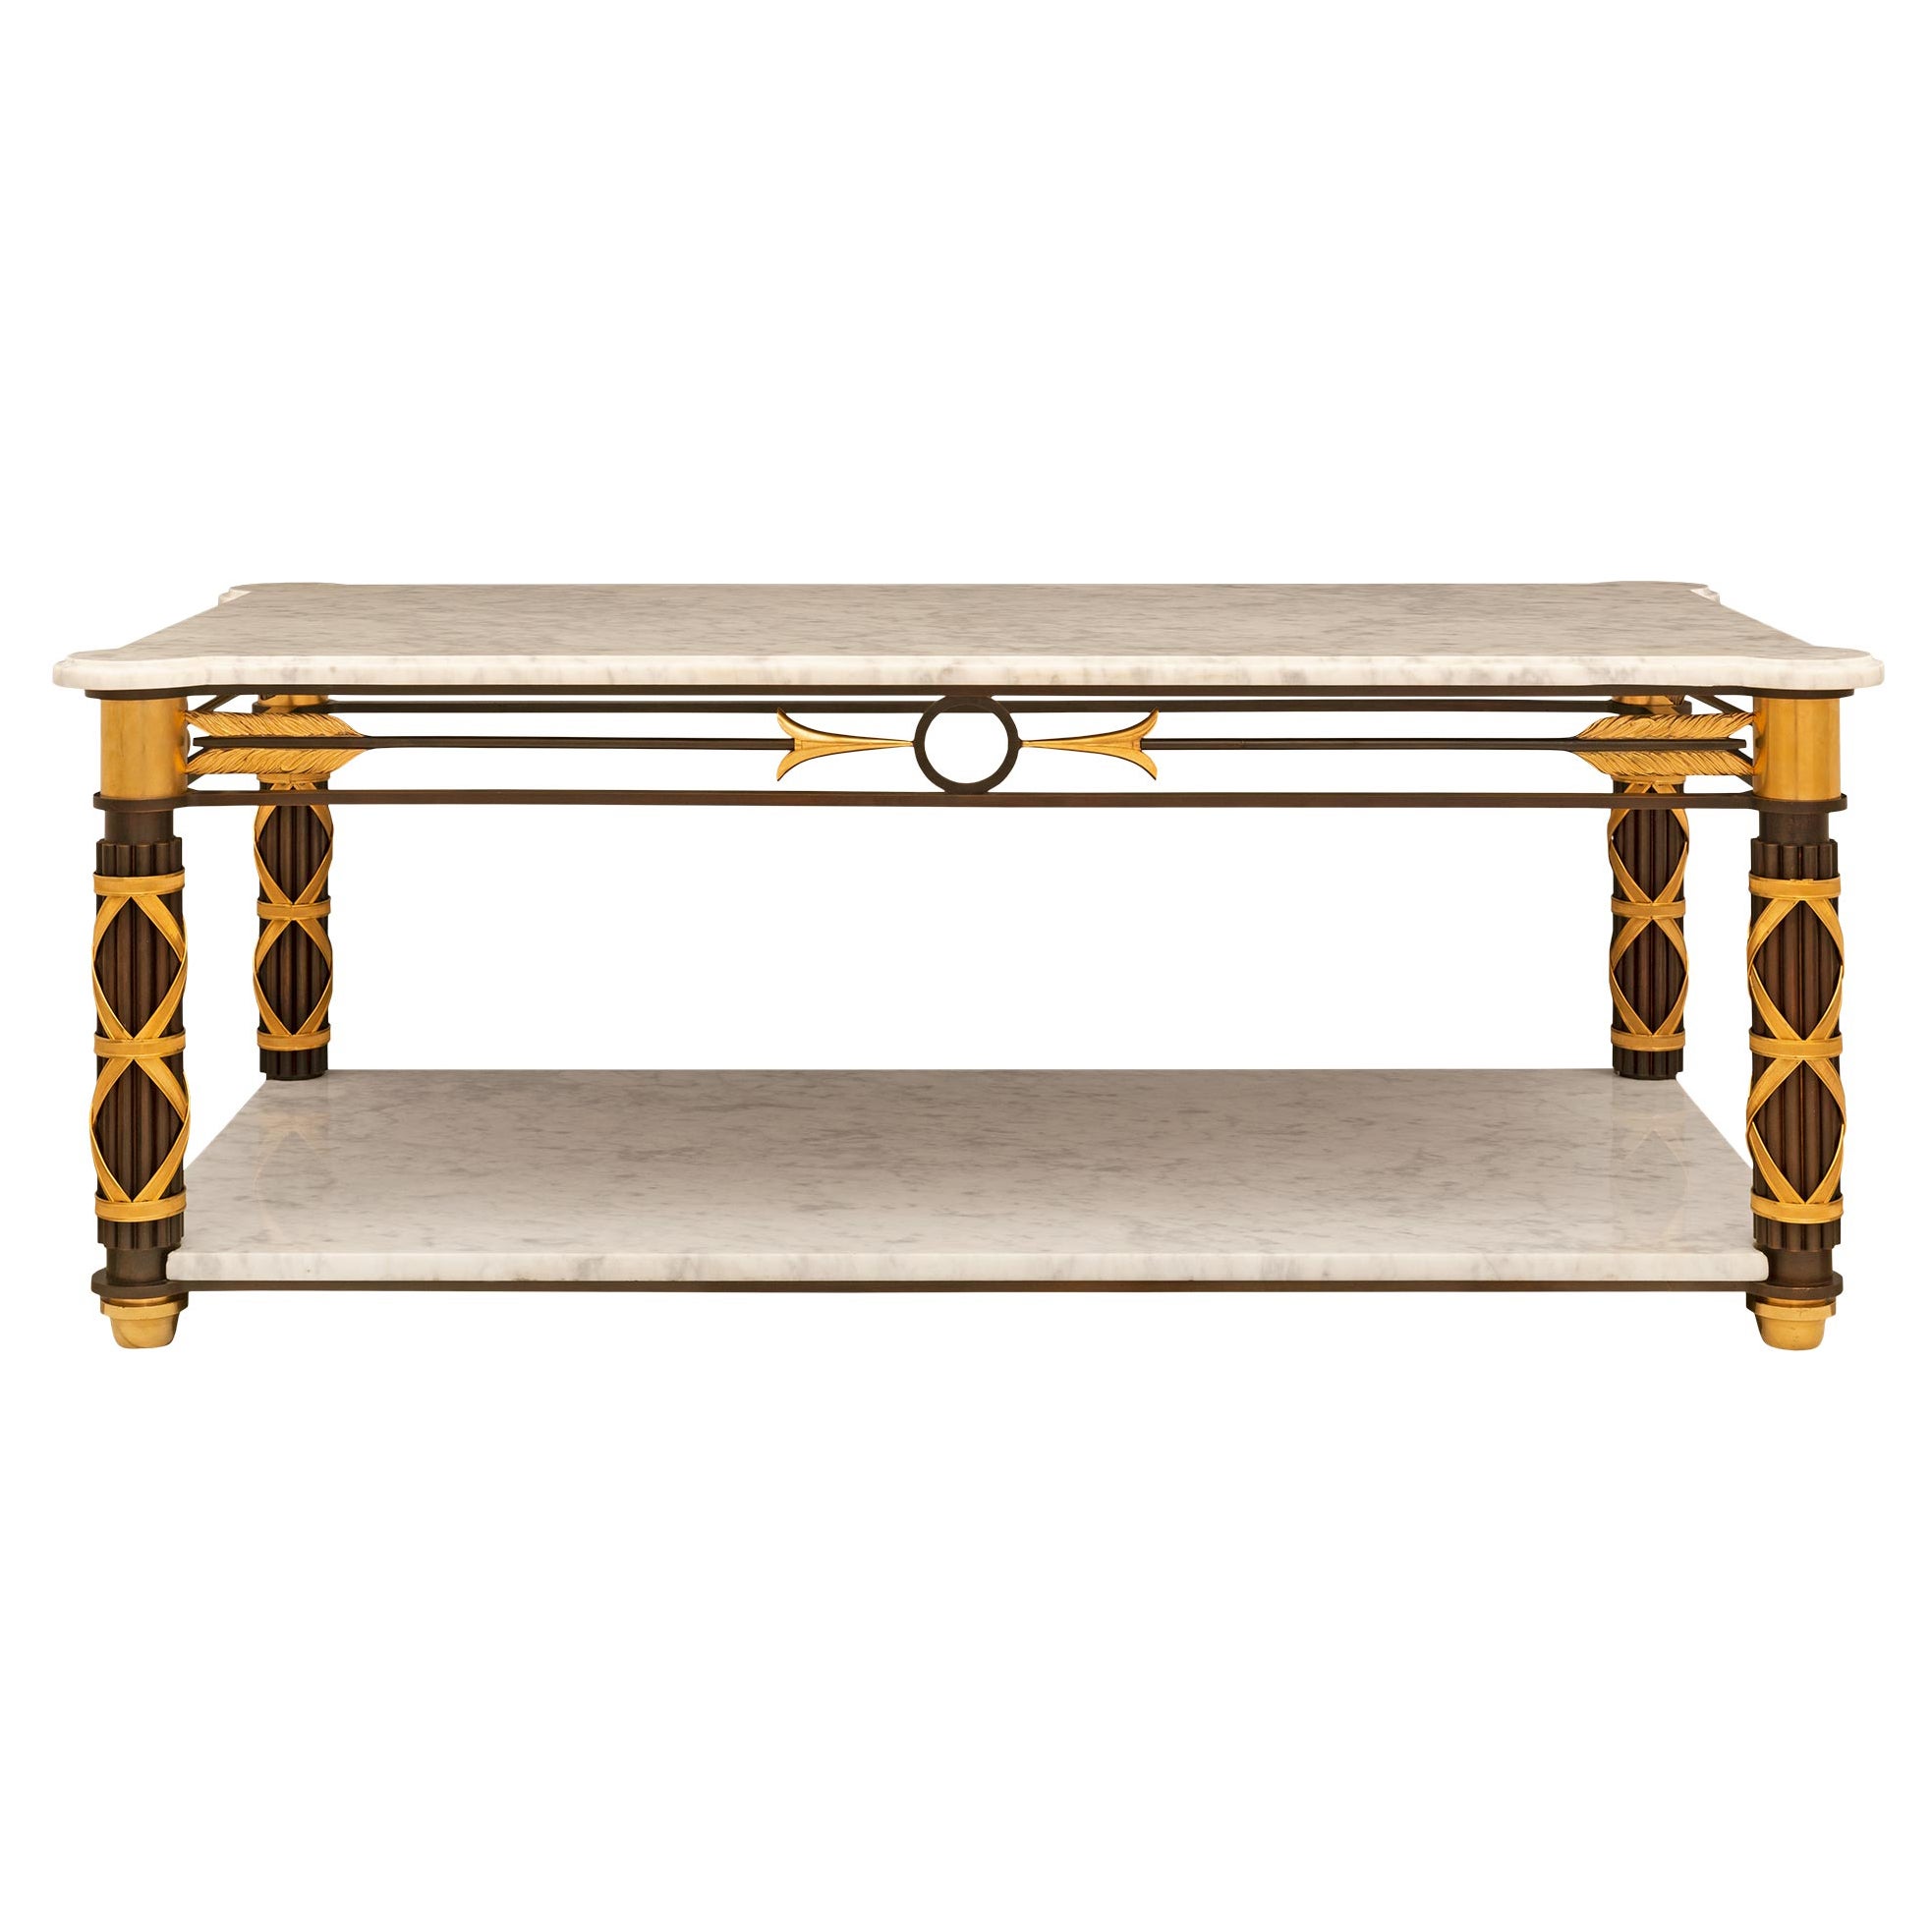 French 19th Century Neoclassical St. Bronze, Ormolu And Marble Console Table For Sale